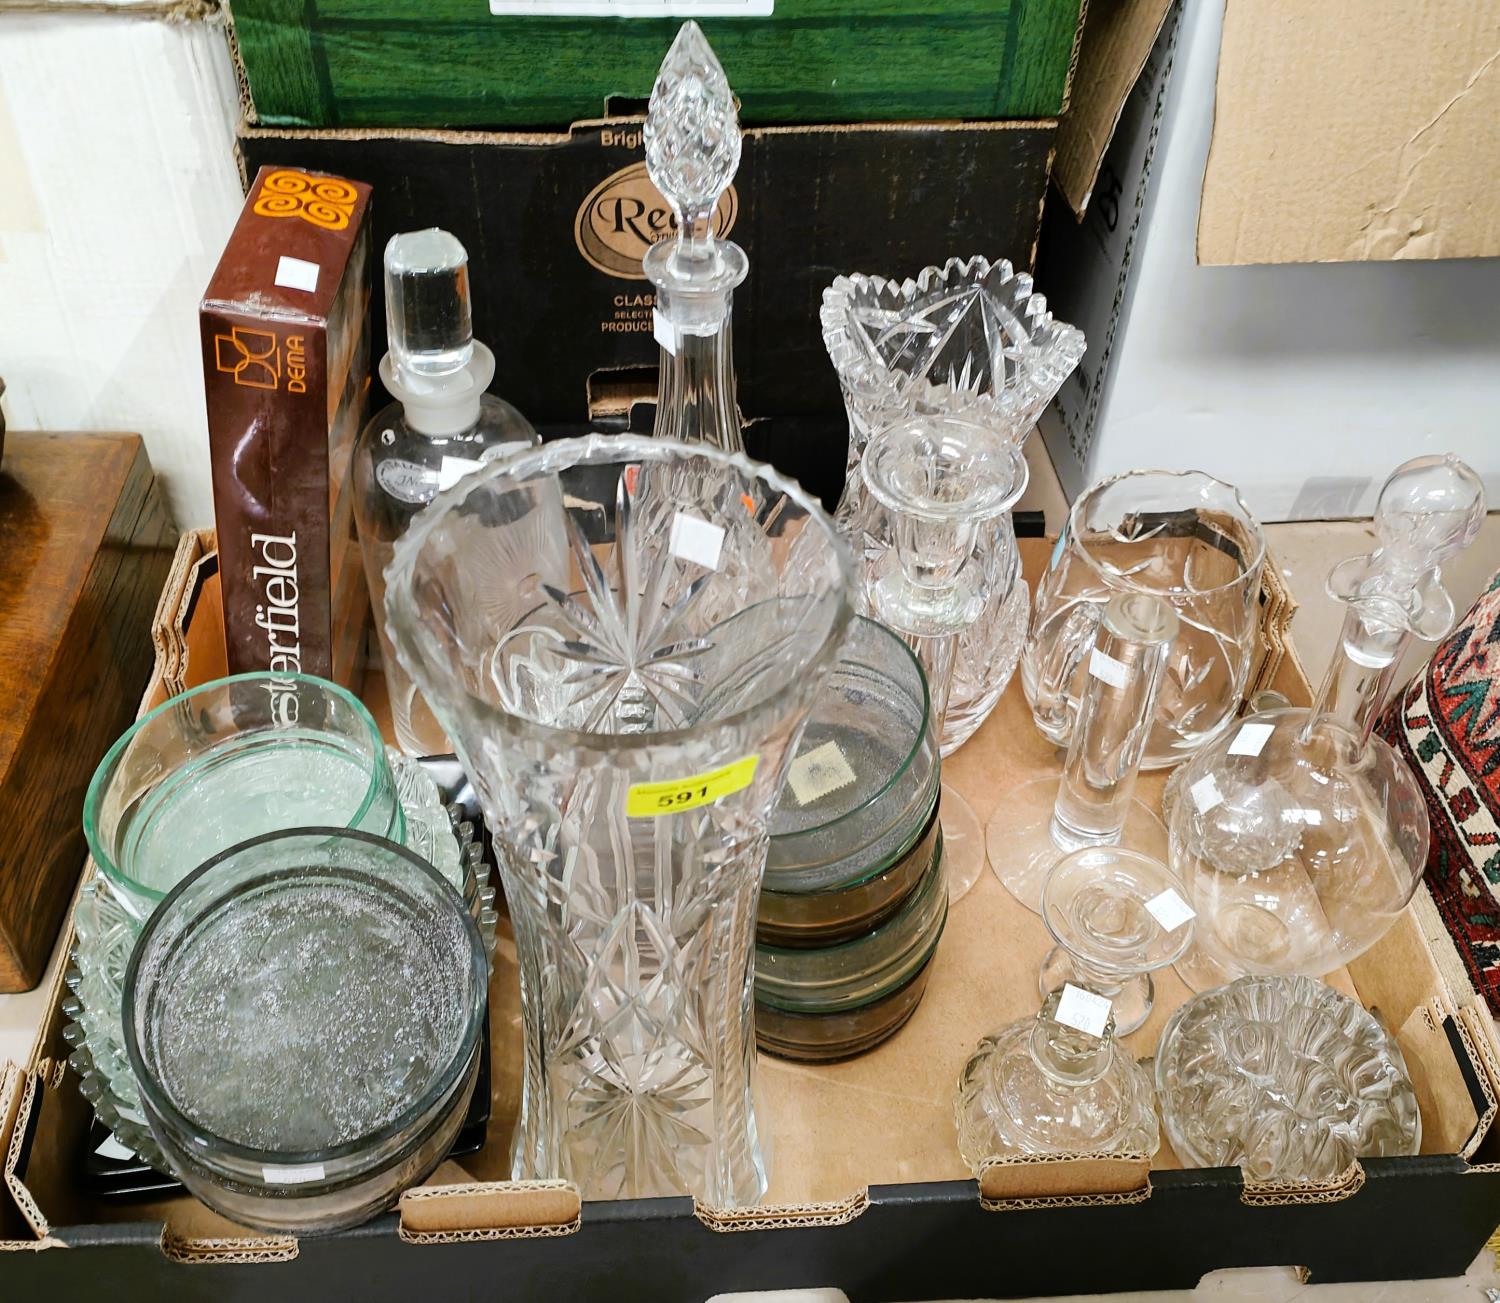 A large selection of cut and moulded glassware including vases, bowls, candlesticks etc, dishes etc